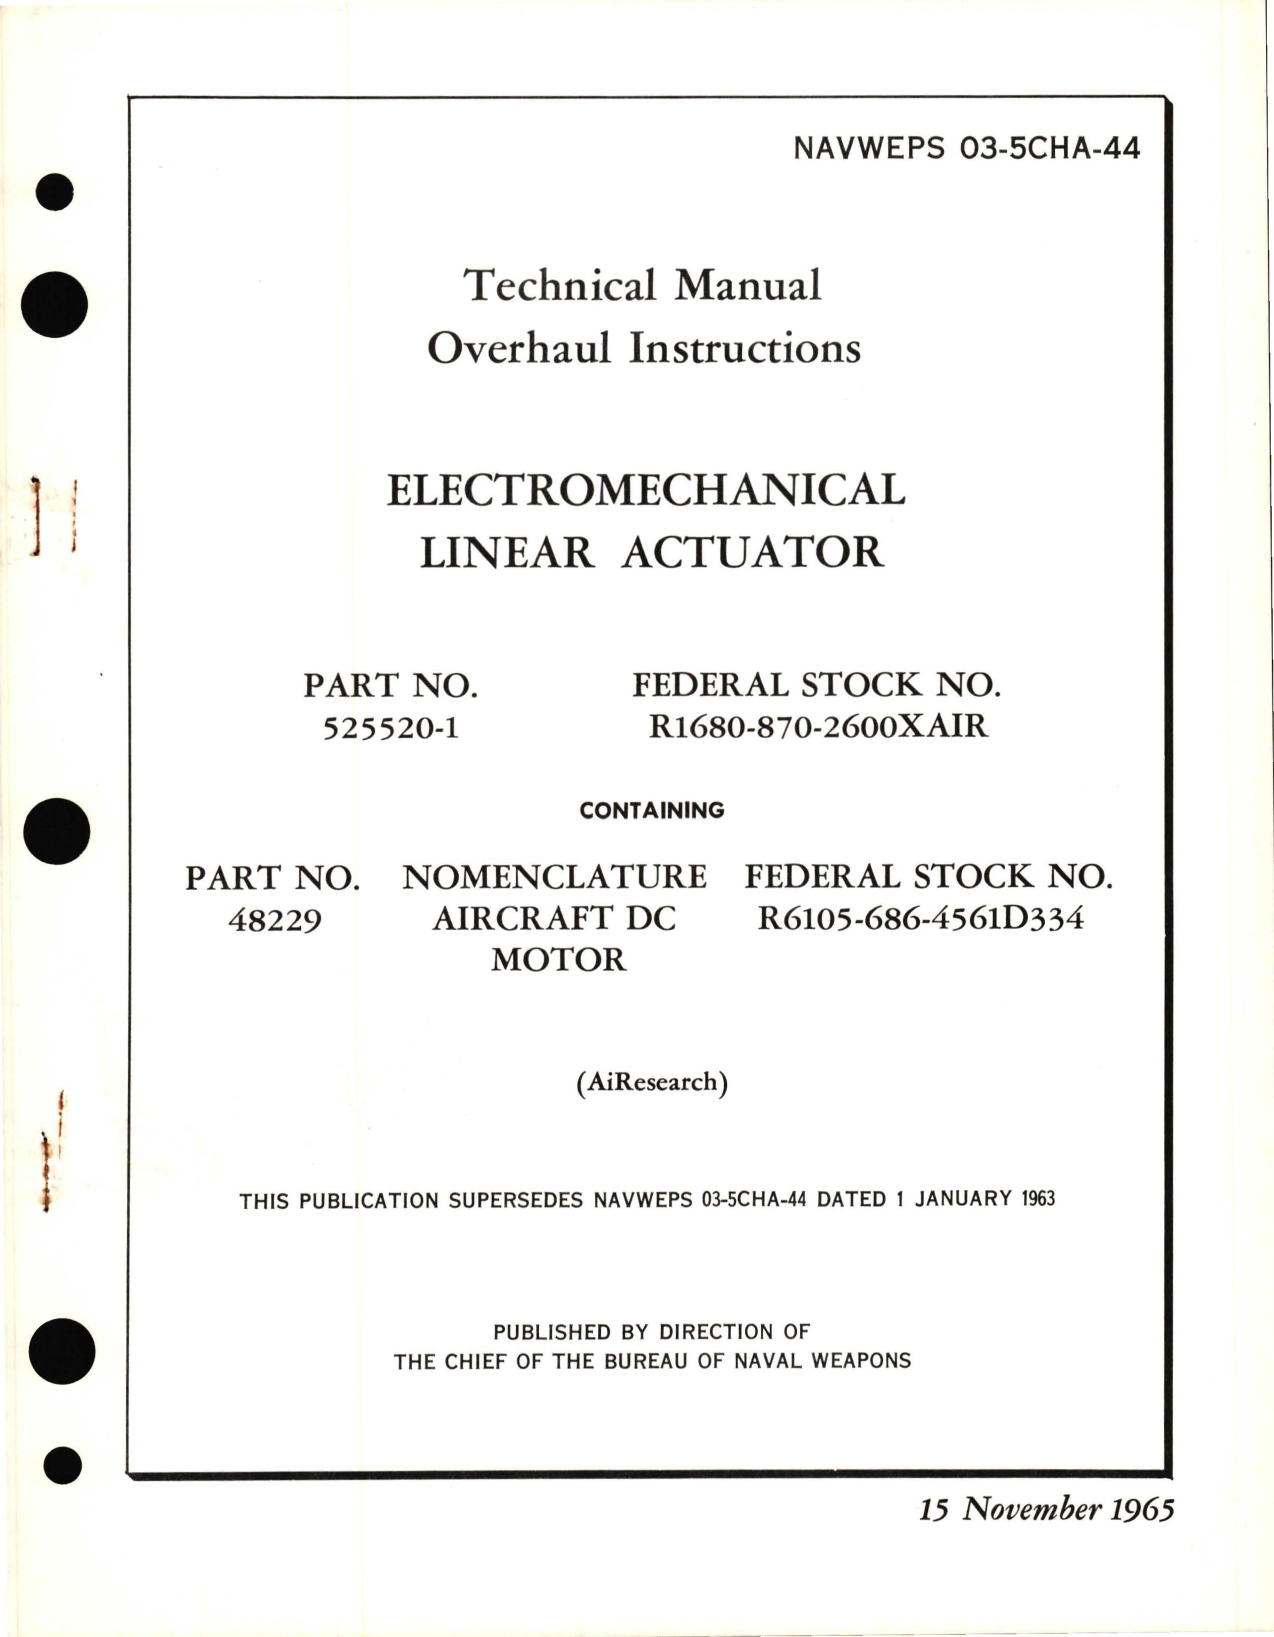 Sample page 1 from AirCorps Library document: Overhaul Instructions for Electromechanical Linear Actuator - Part 525520-1 and 48229